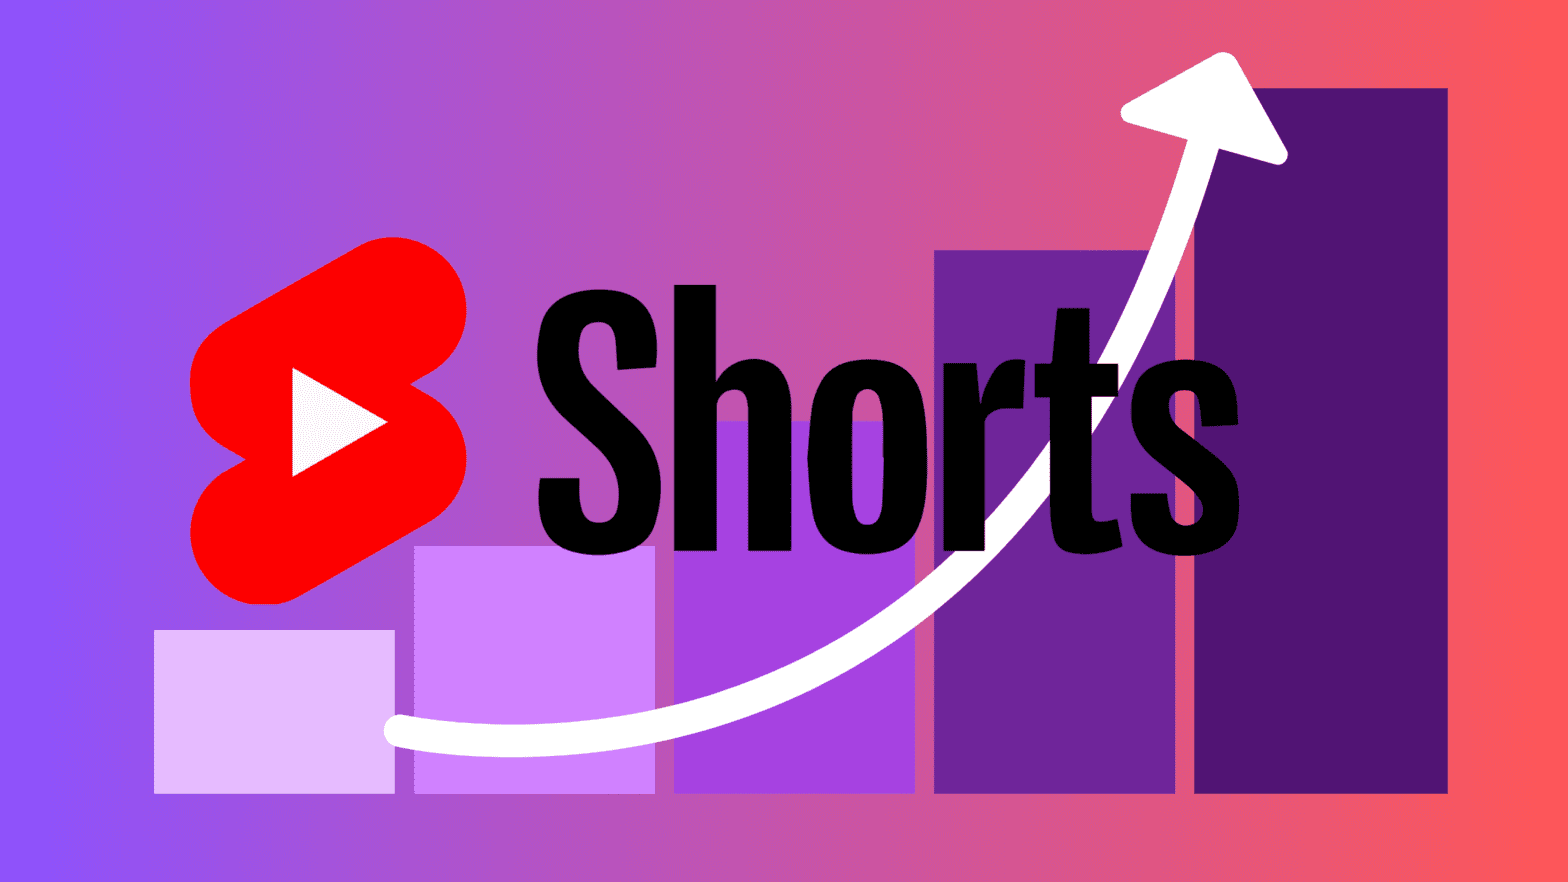 Use this YouTube shorts strategy to grow your channel